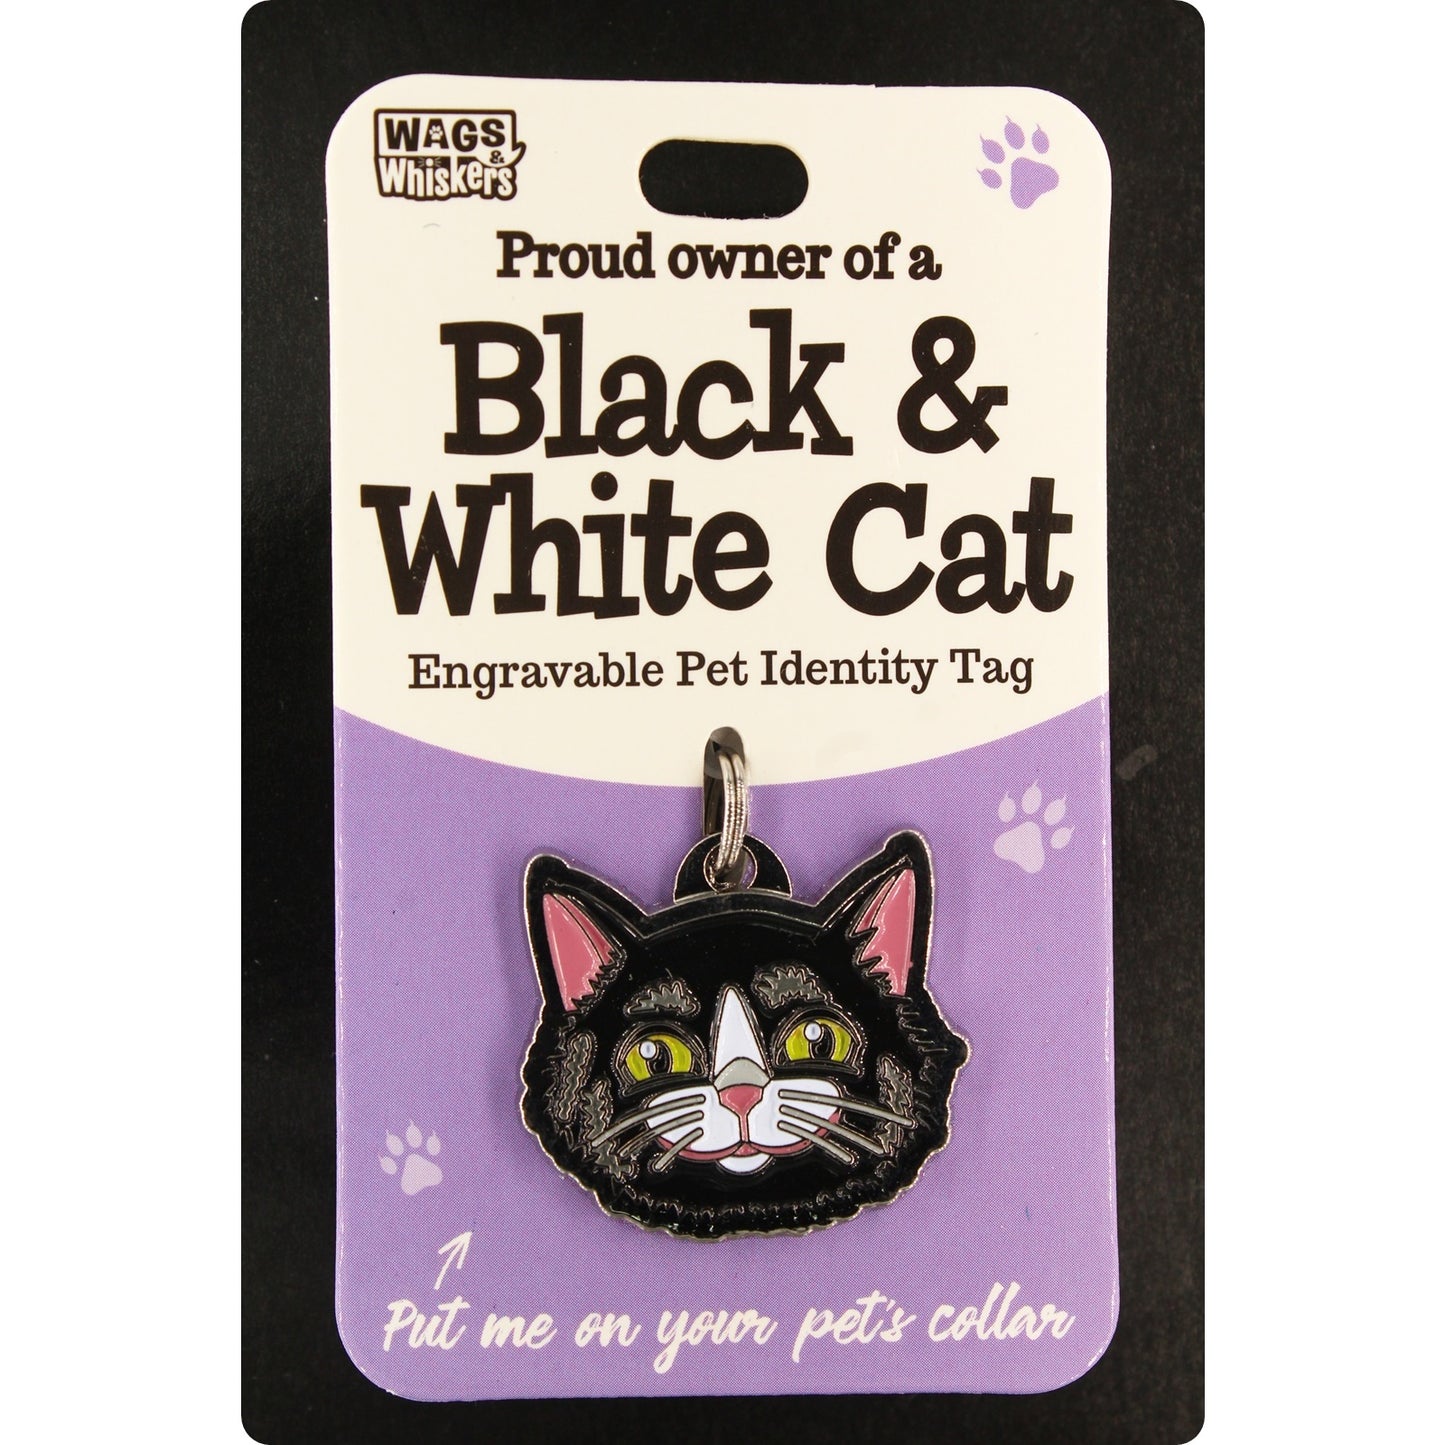 DESIRABLE GIFTS BLACK & WHITE CAT WAGS & WHISKERS CAT PET TAG I CAN NOT ENGRAVE THIS ITEM